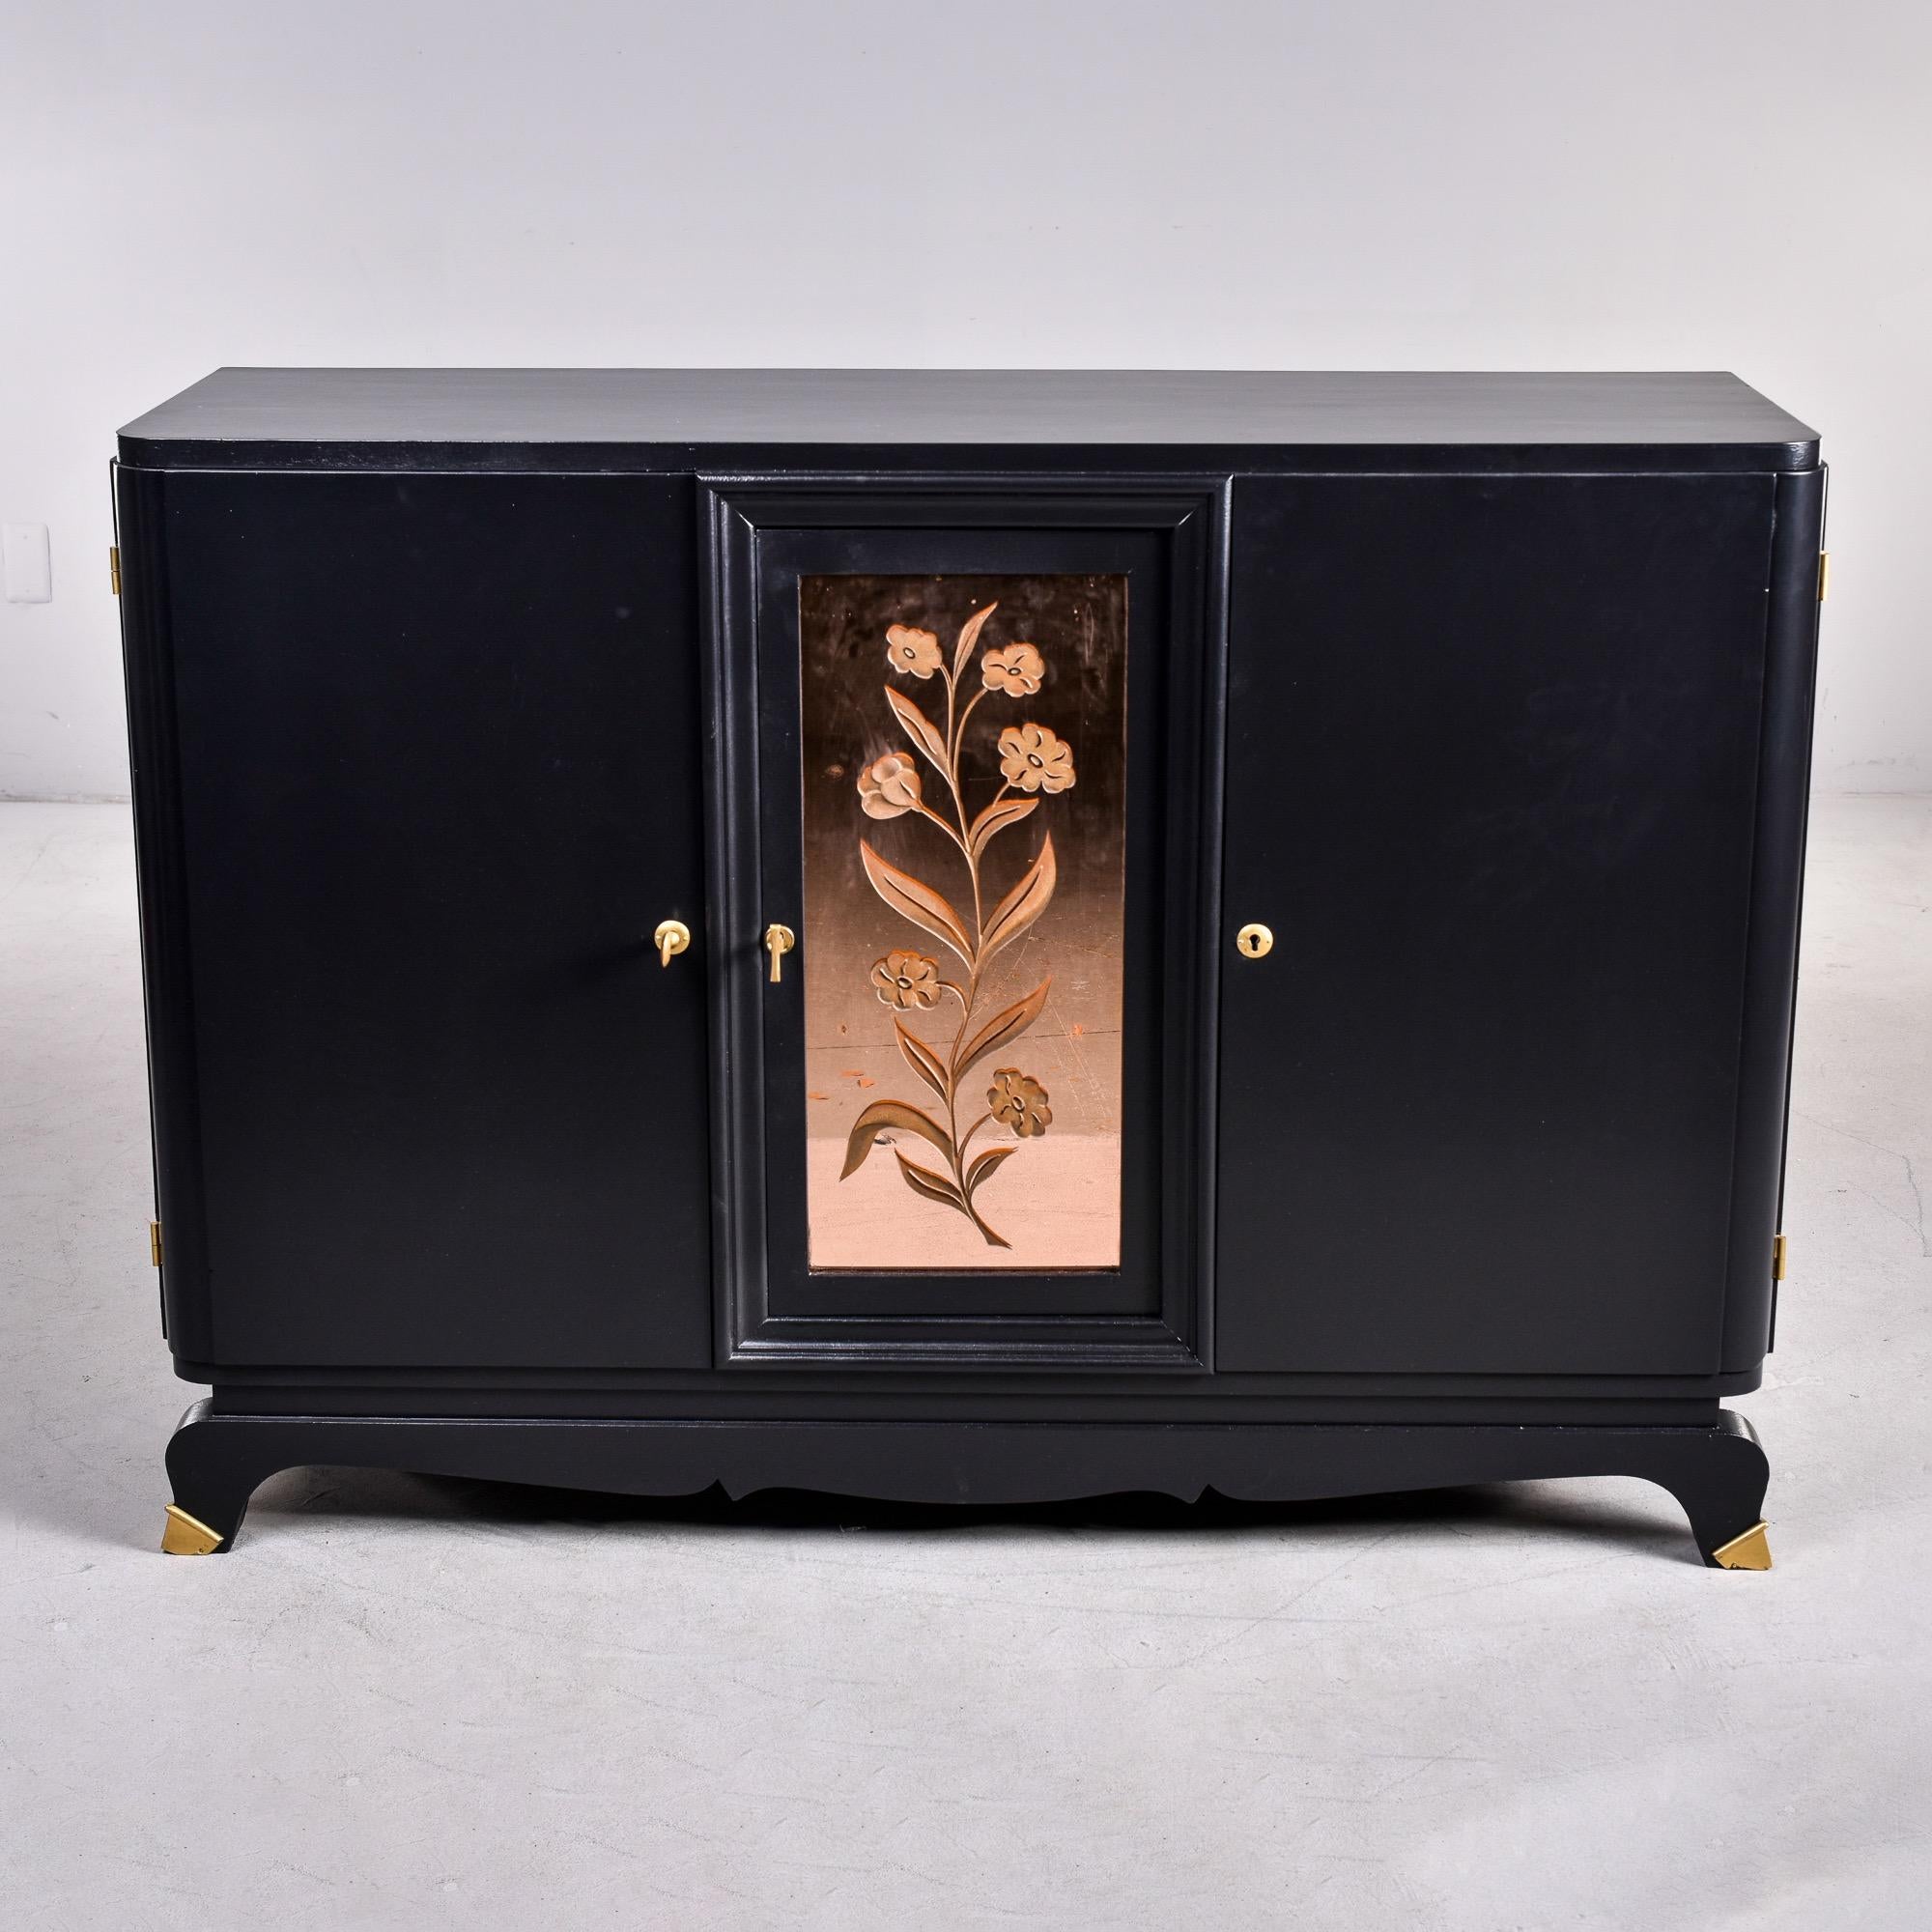 Found in France, this circa 1930s buffet cabinet has a new black finish and peachy pink etched mirrored panel in the center Each side cabinet has a functional lock and key and opens to a compartment with one internal adjustable shelf that has inlay